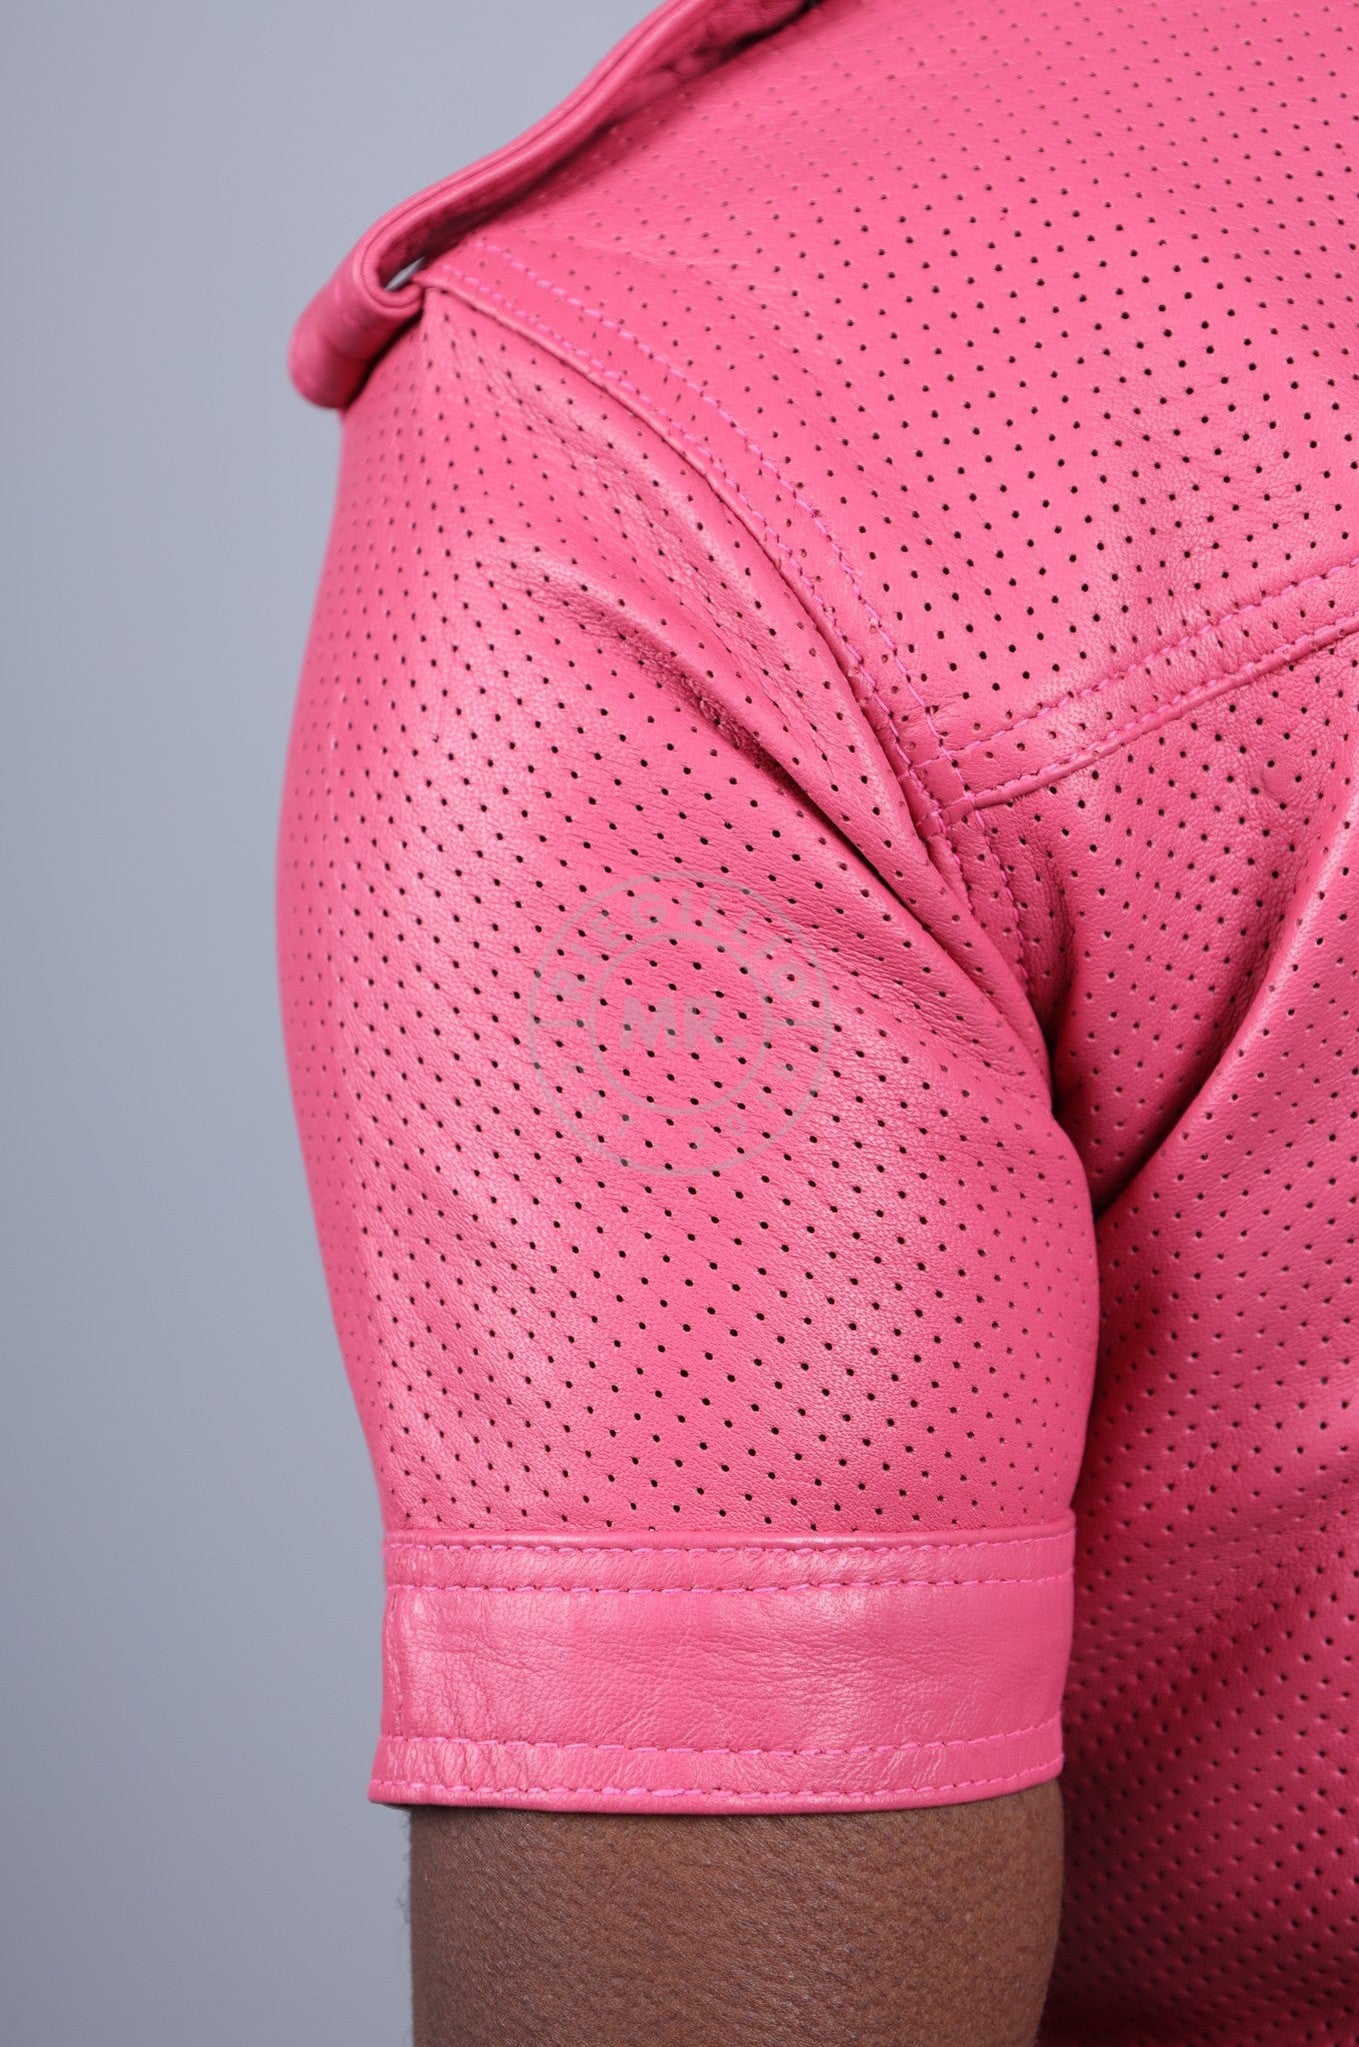 Pink Leather Perforated Shirt at MR. Riegillio